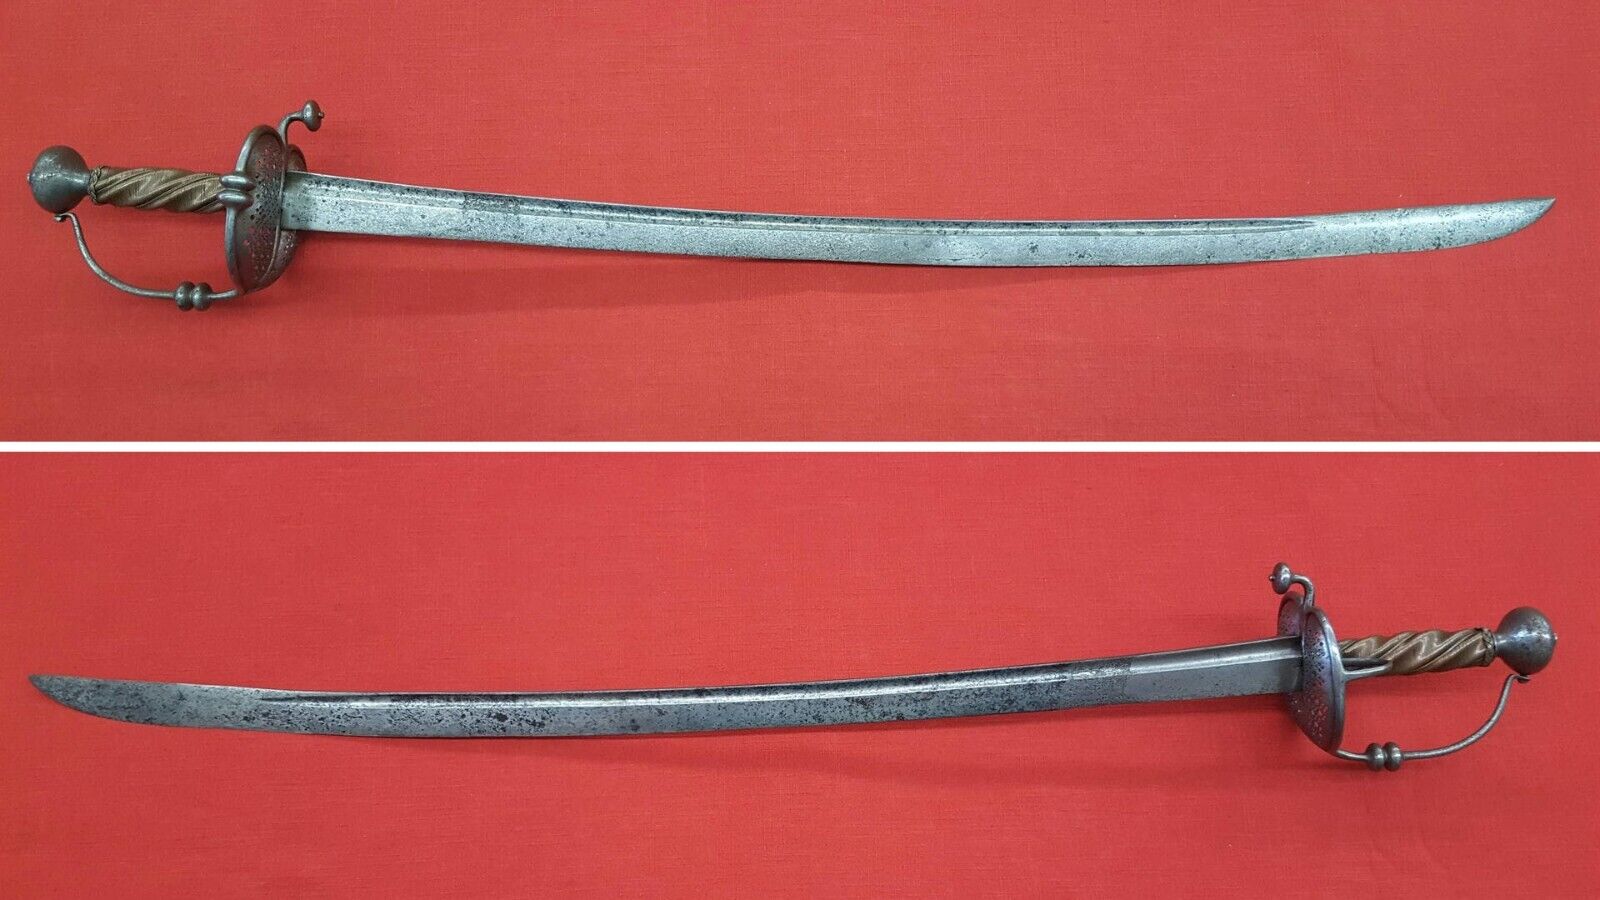 Remarkable Mid-17th Century Saber With “Walloon” Style Hilt And Very Long Blade